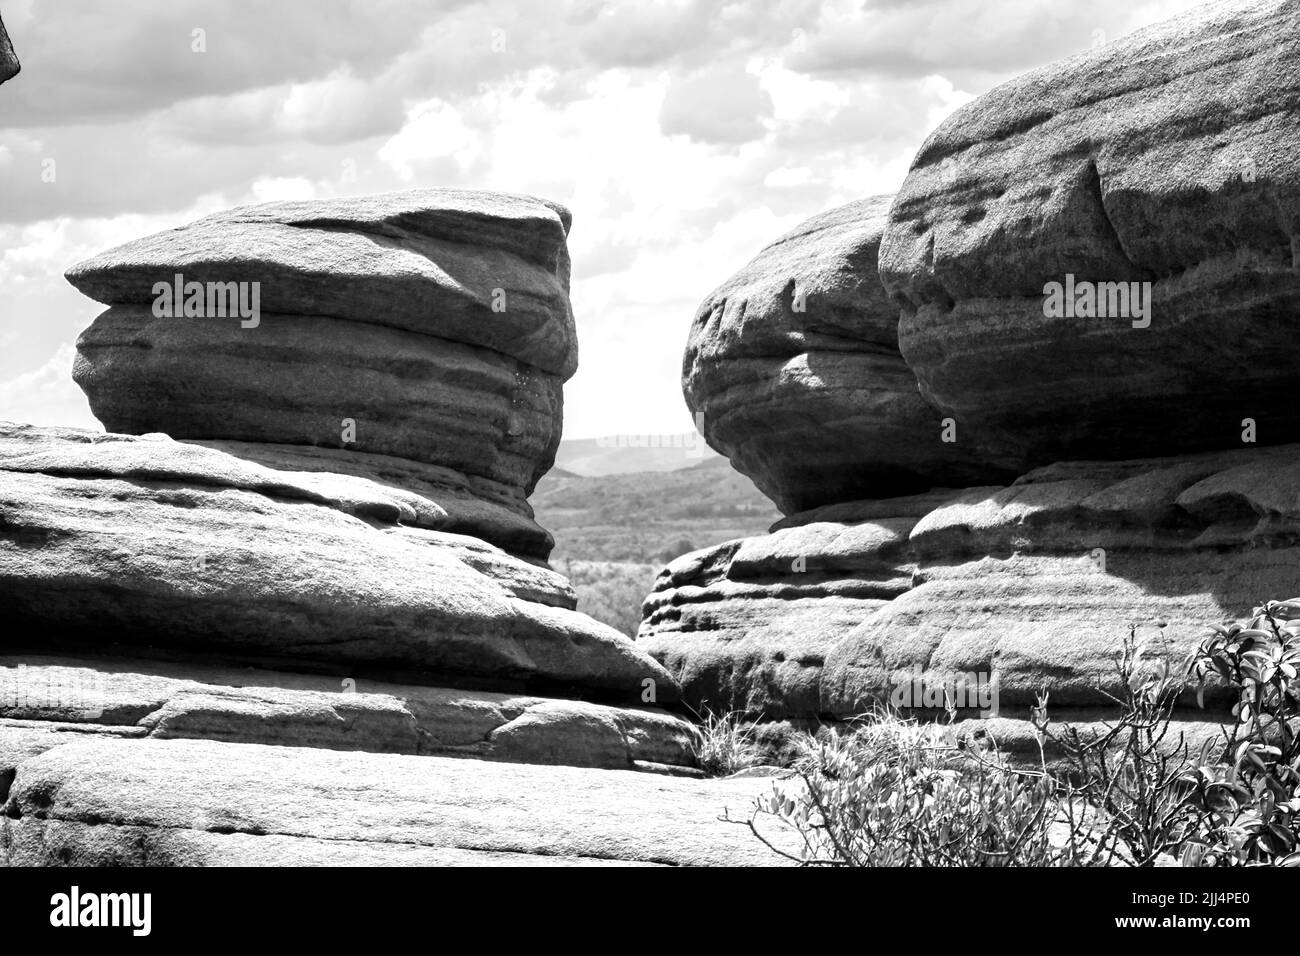 Rounded weathered Quartzite boulders in the Magaliesberg Mountains South Africa in black and white Stock Photo